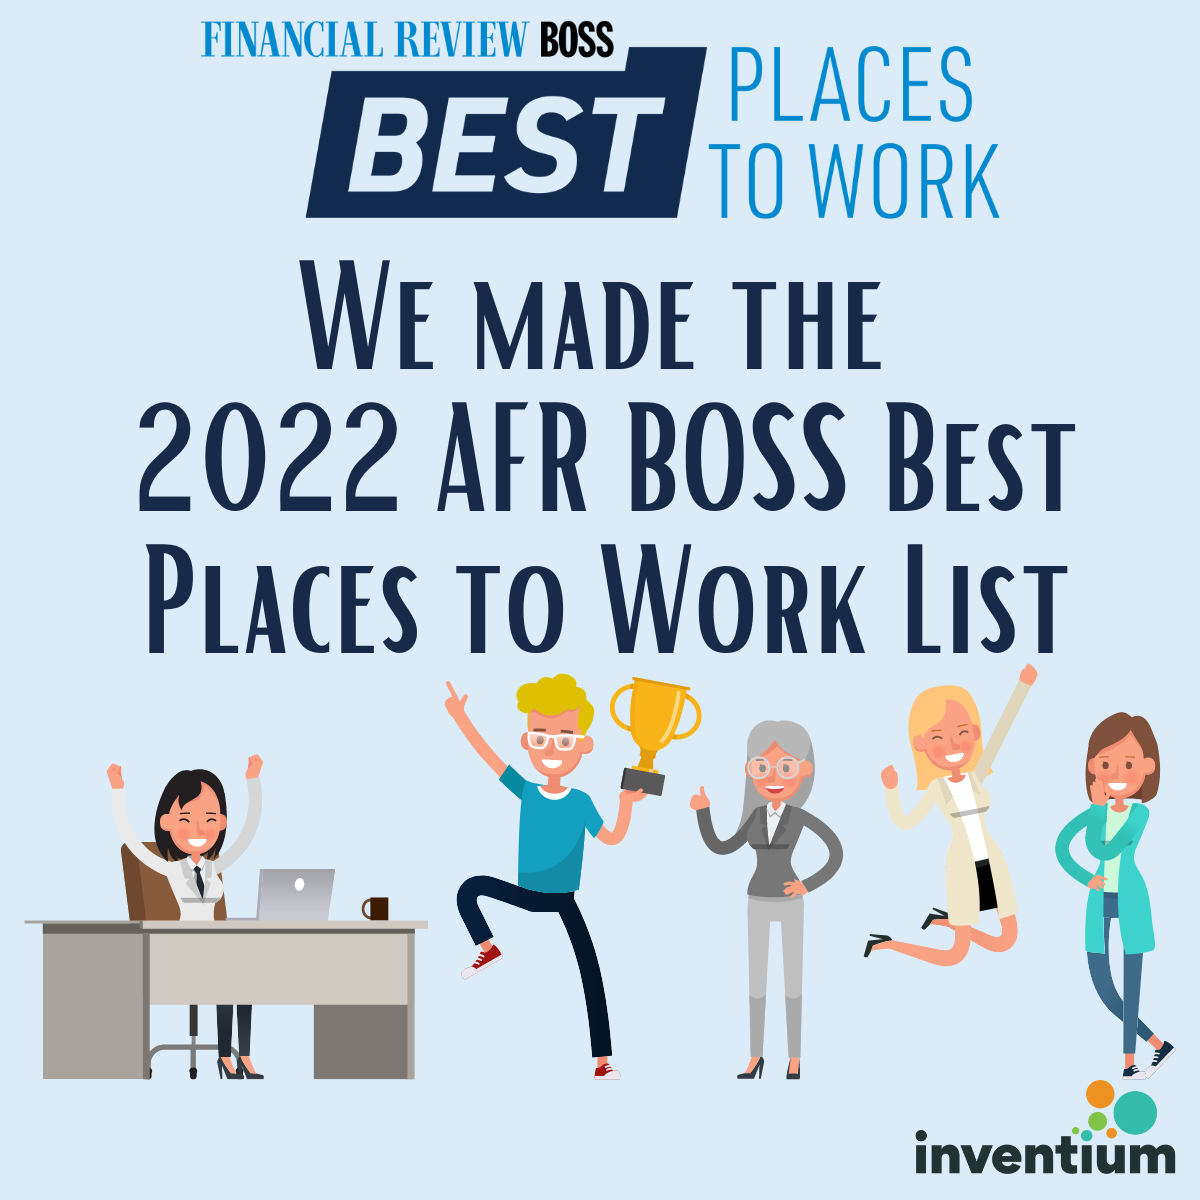 Best places to work 2022